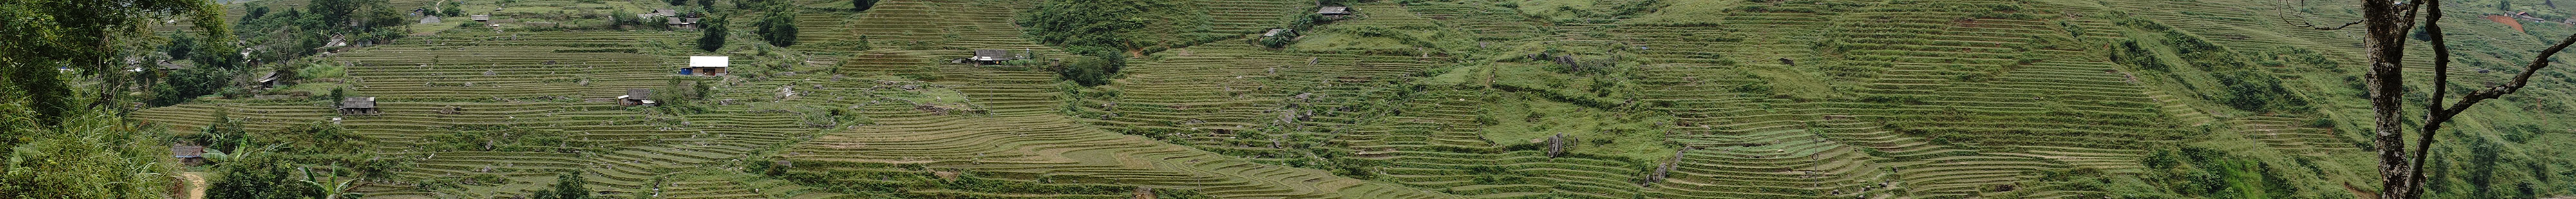 Read the latest news and blogs on land rights issues and investment